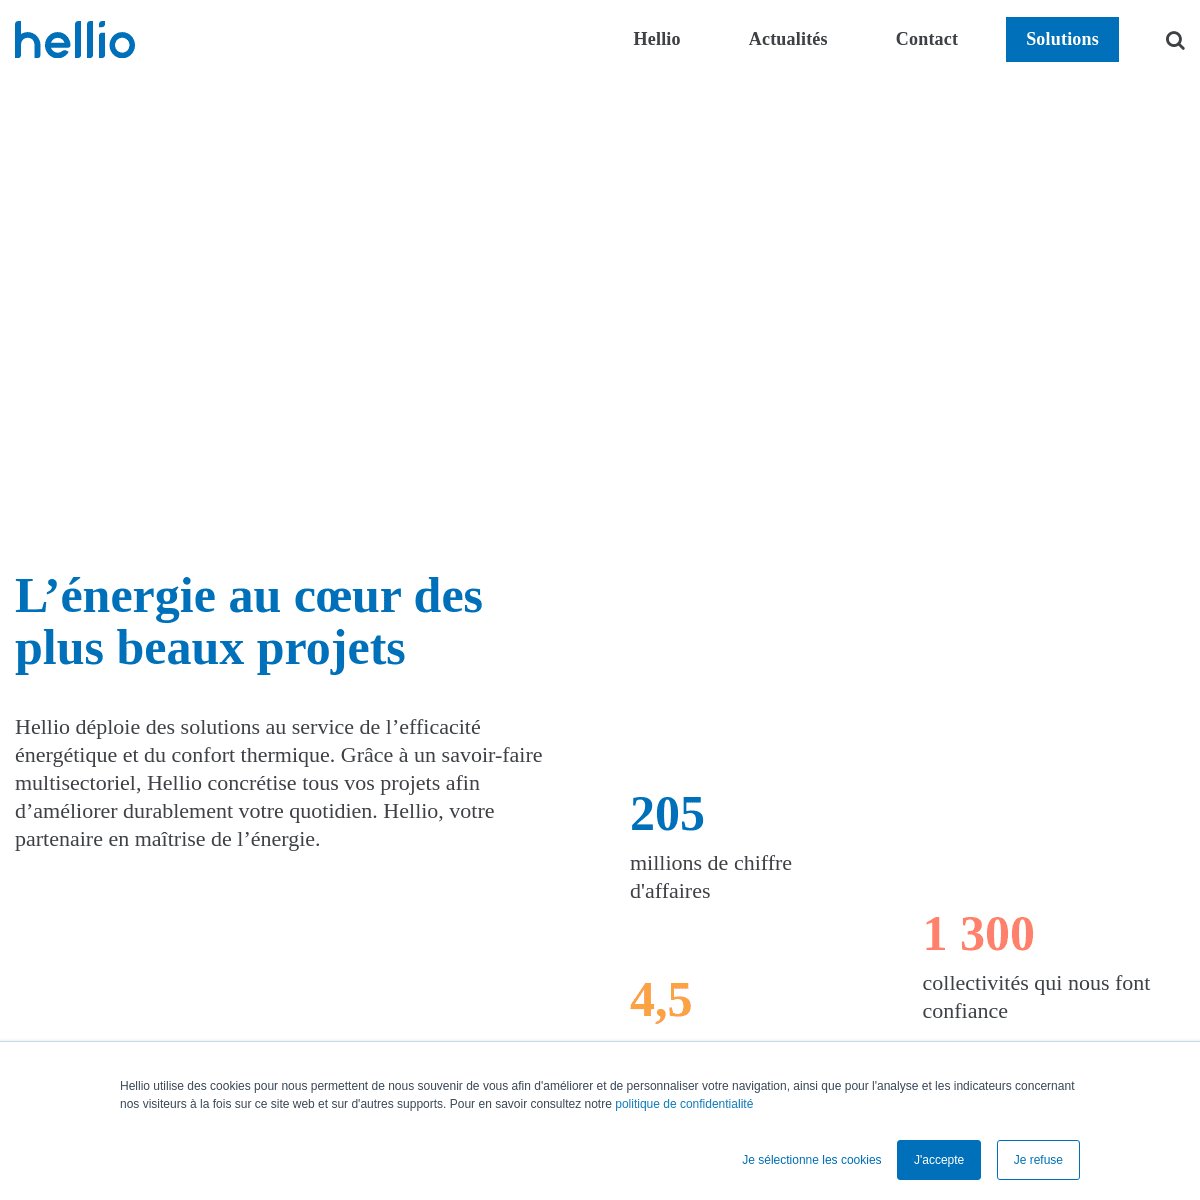 A complete backup of https://hellio.com